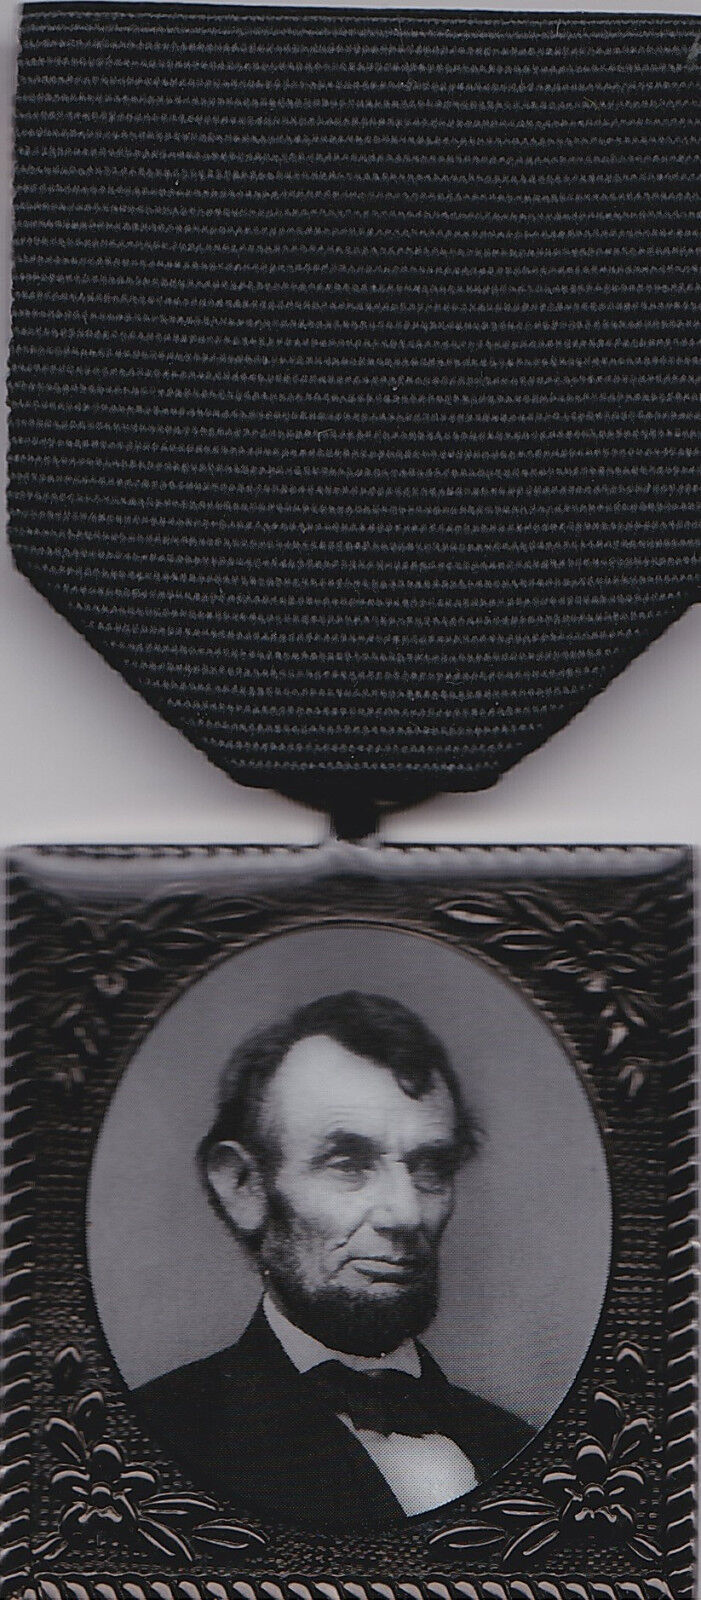 Abraham Lincoln Civil War 150th Anniversary Mourning Medal